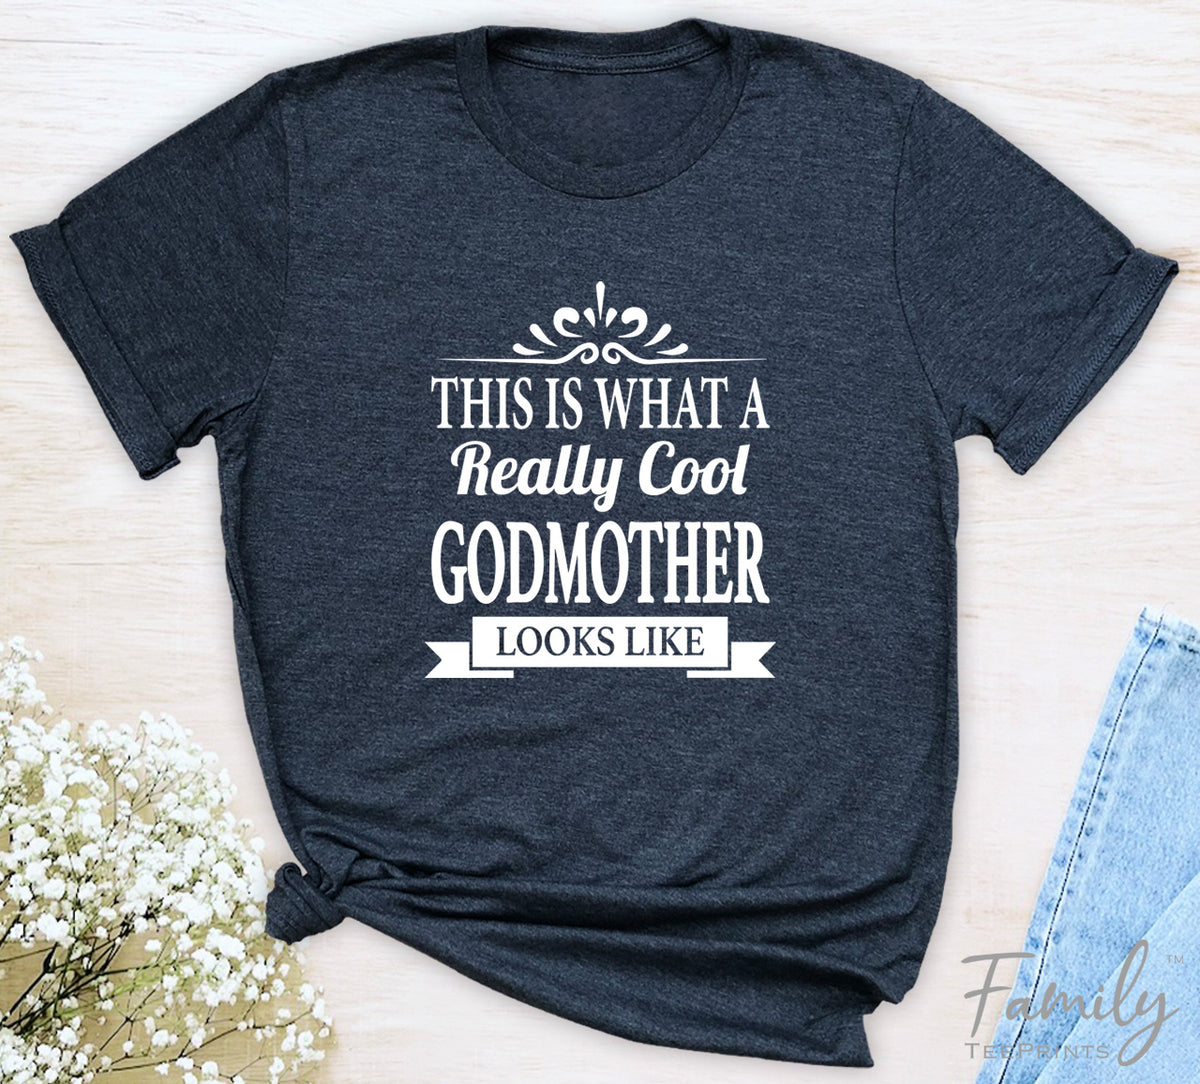 This Is What A Really Cool Godmother Looks Like - Unisex T-shirt - Godmother Shirt - Gift for Godmother - familyteeprints